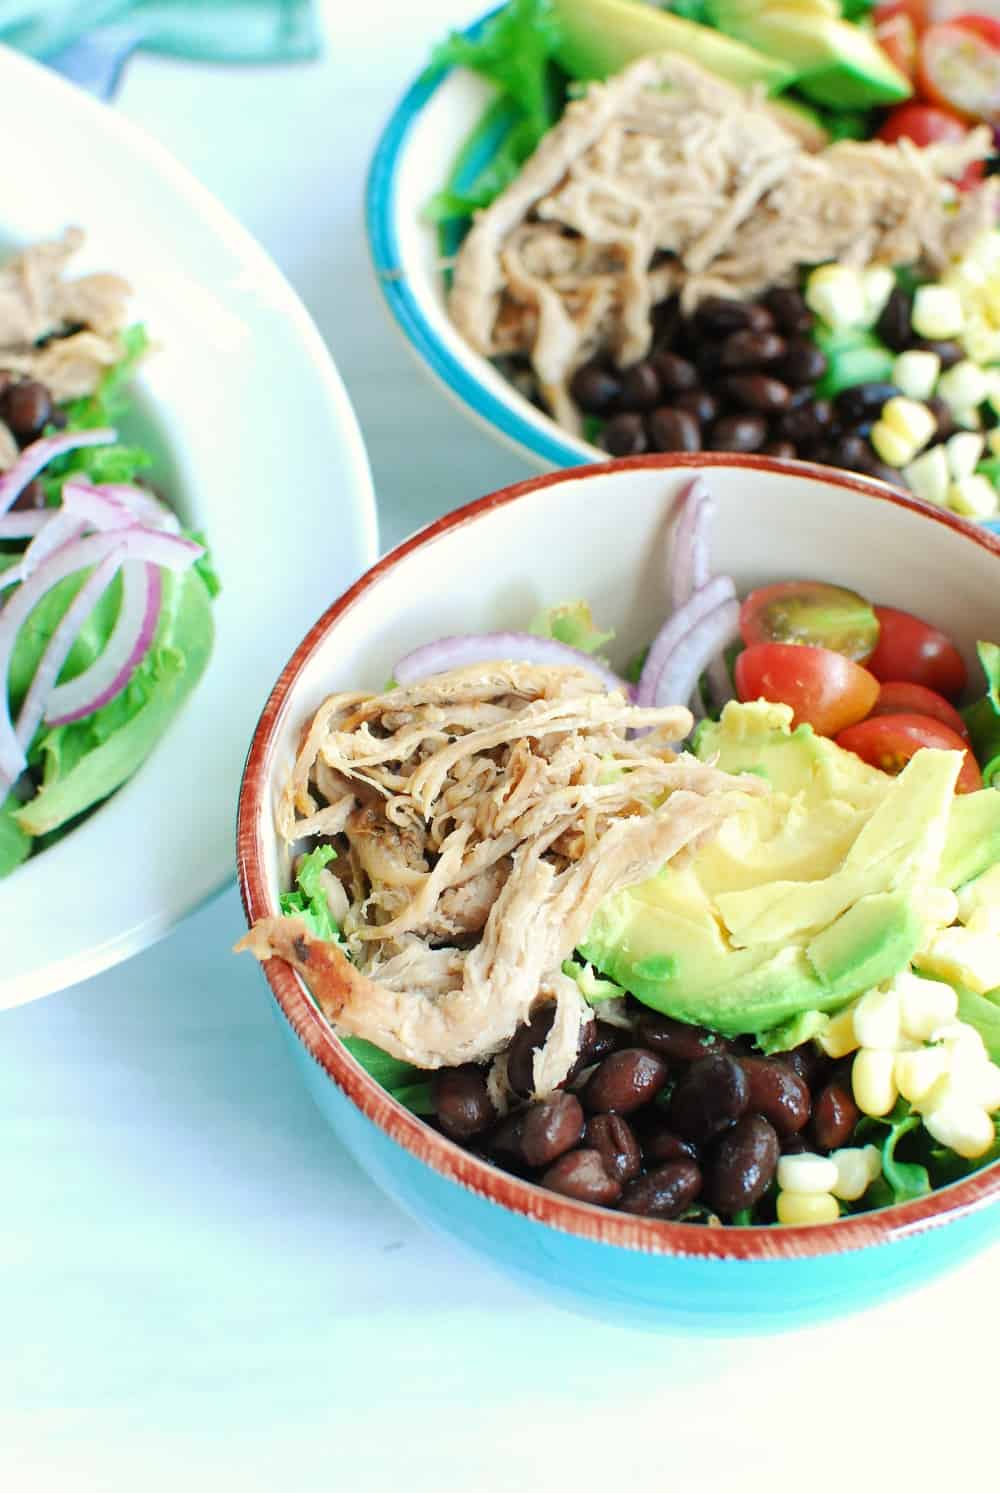 Bowl of carnitas salad with pork, tomatoes, corn, and beans